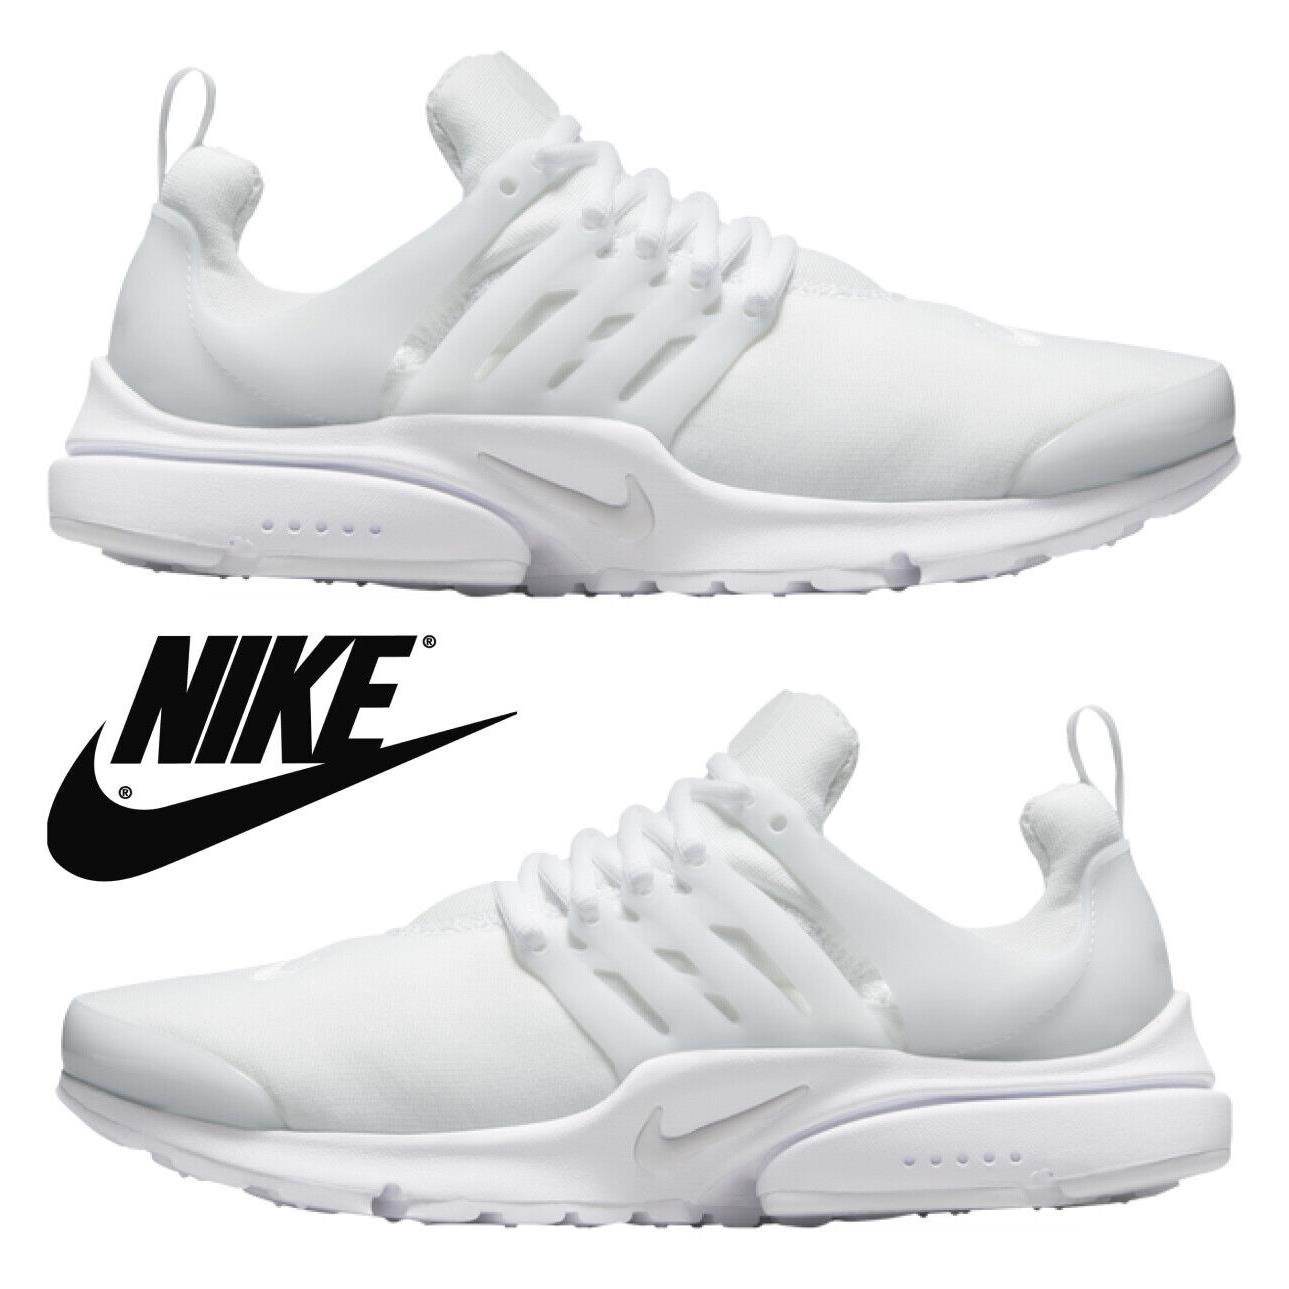 Nike Air Presto Running Sneakers Men`s Athletic Comfort Casual Shoes White